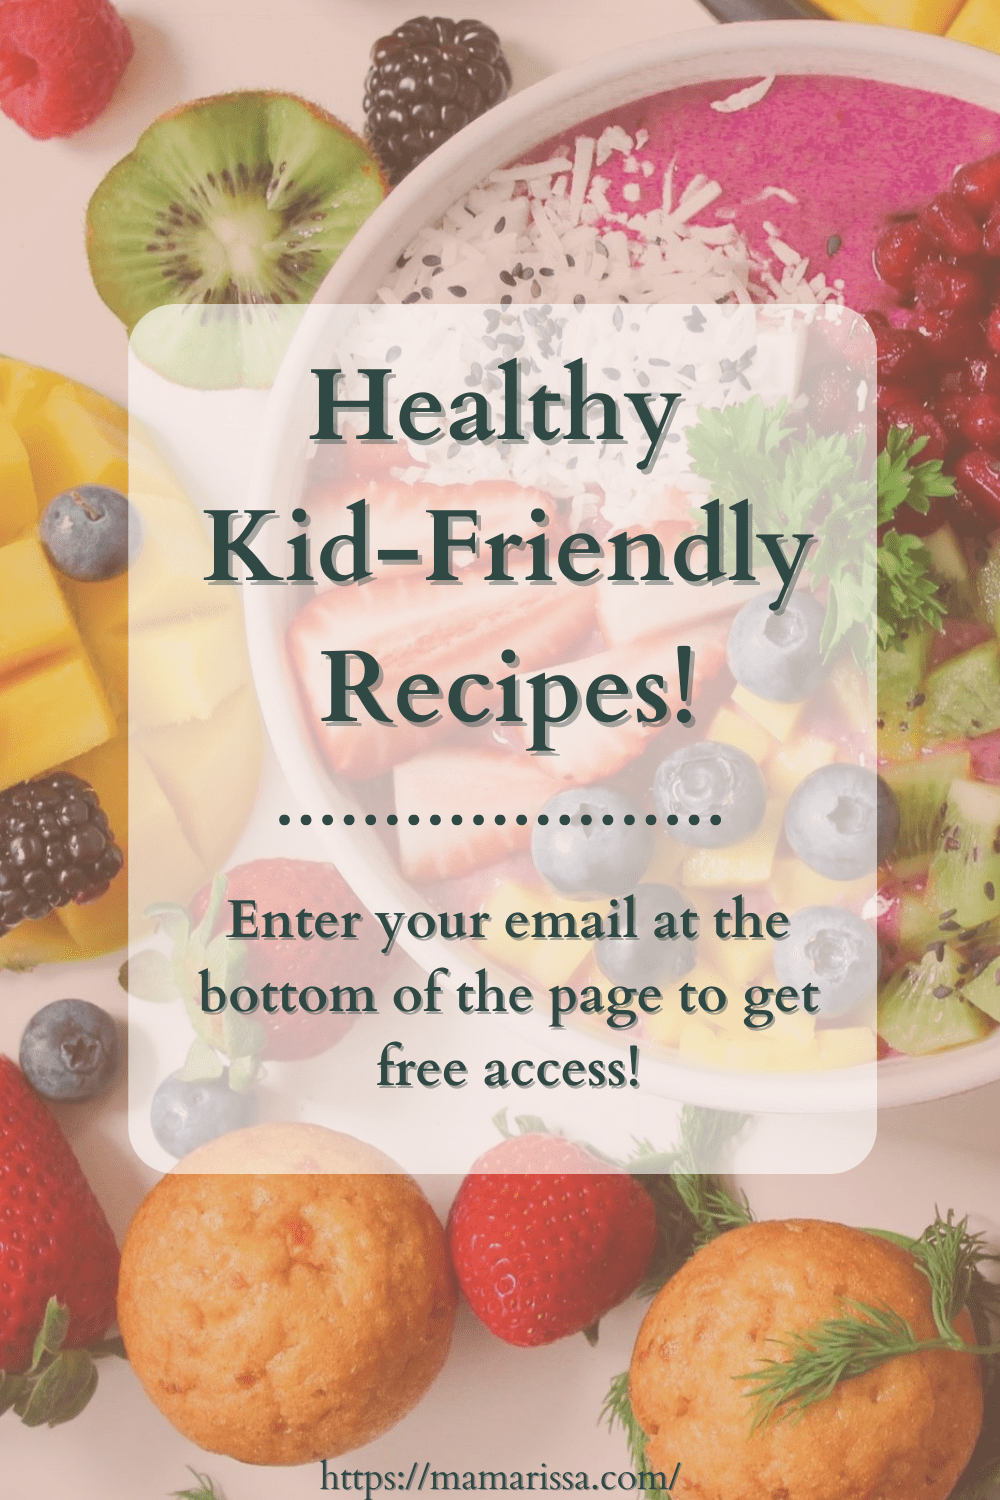 Healthy kid-friendly recipes!

Enter your email at the bottom of the page to get free access!